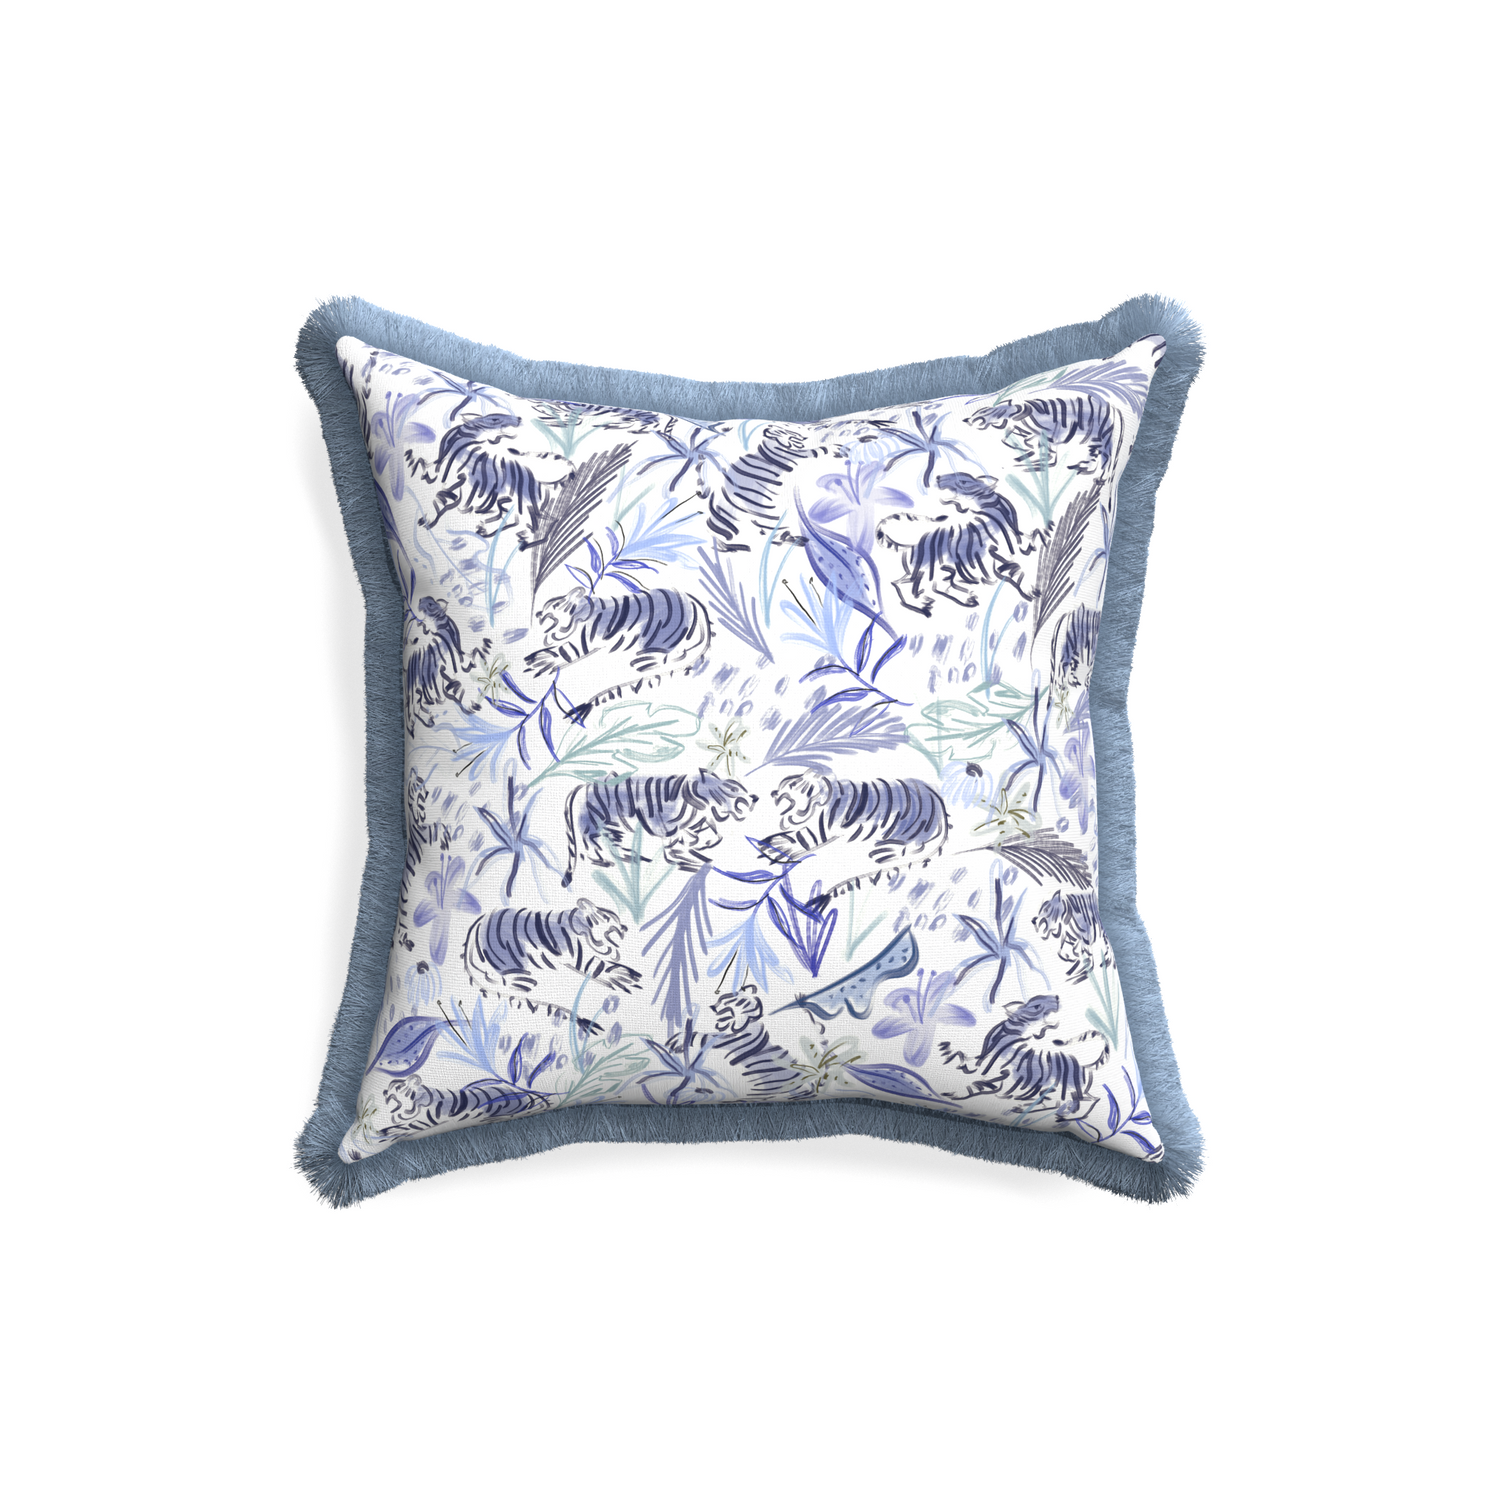 18-square frida blue custom blue with intricate tiger designpillow with sky fringe on white background